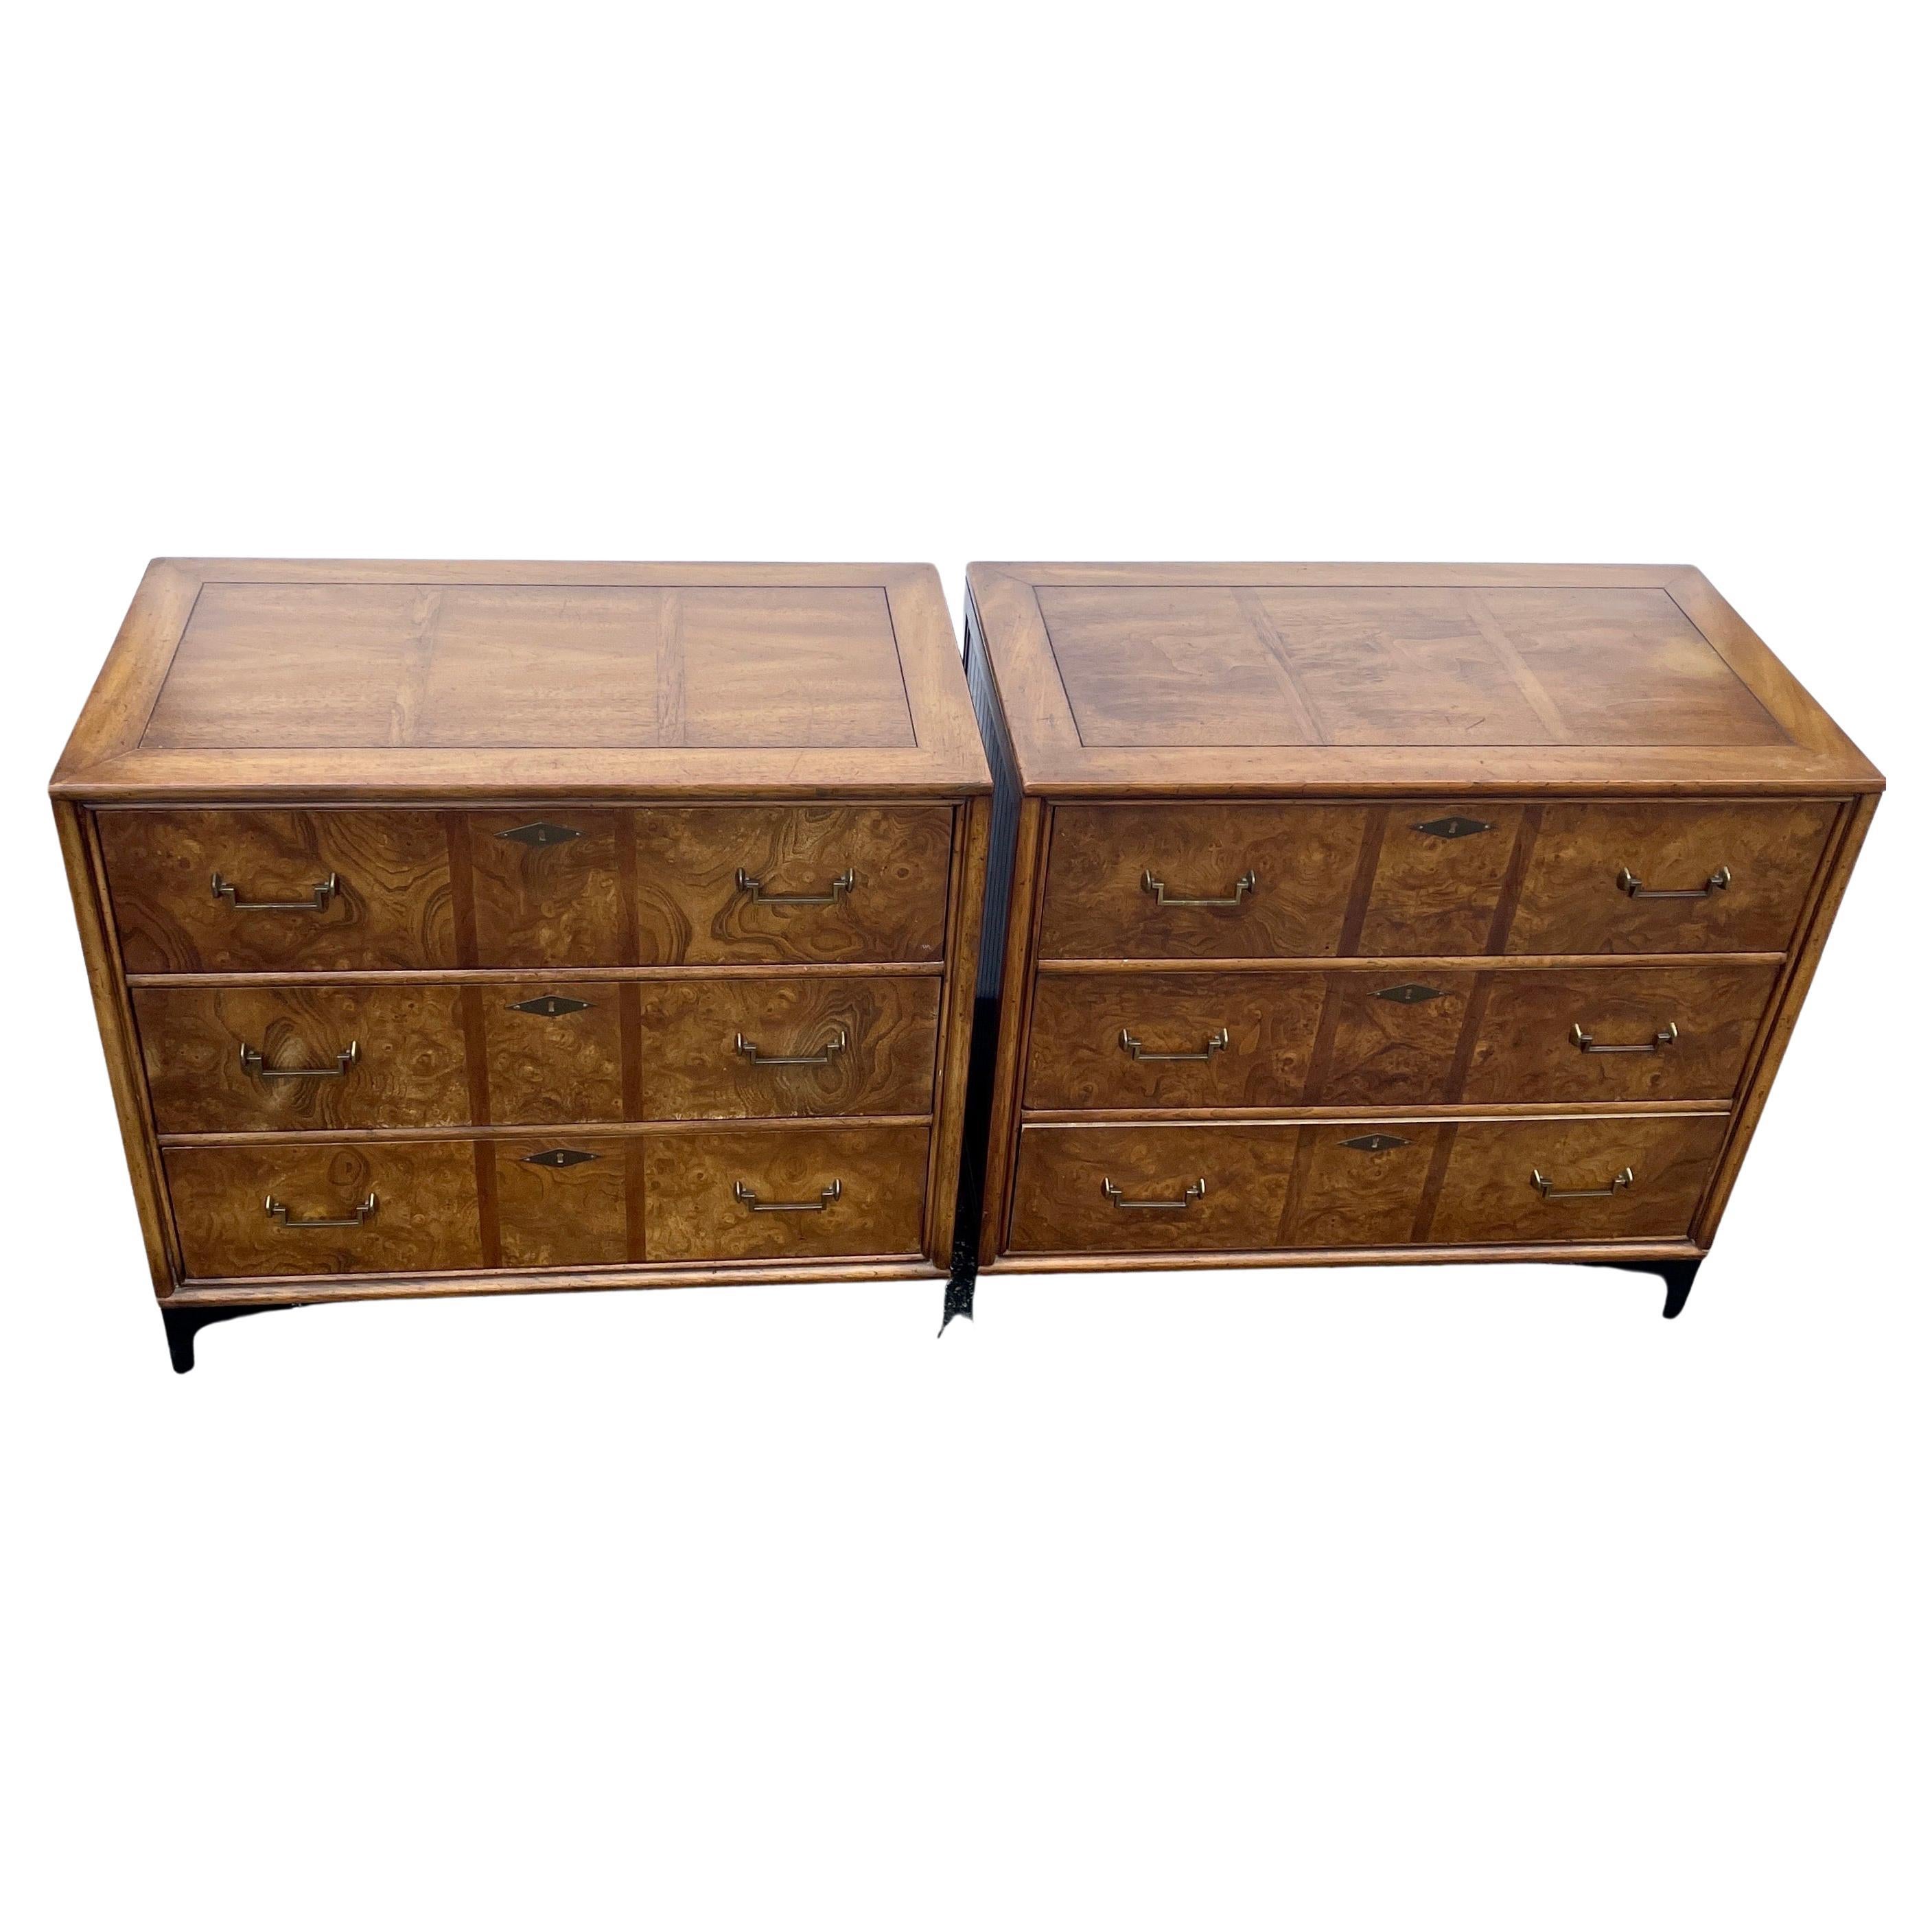 Hand-Crafted Pair of American Mid-Century Mastercraft Chests of Drawers